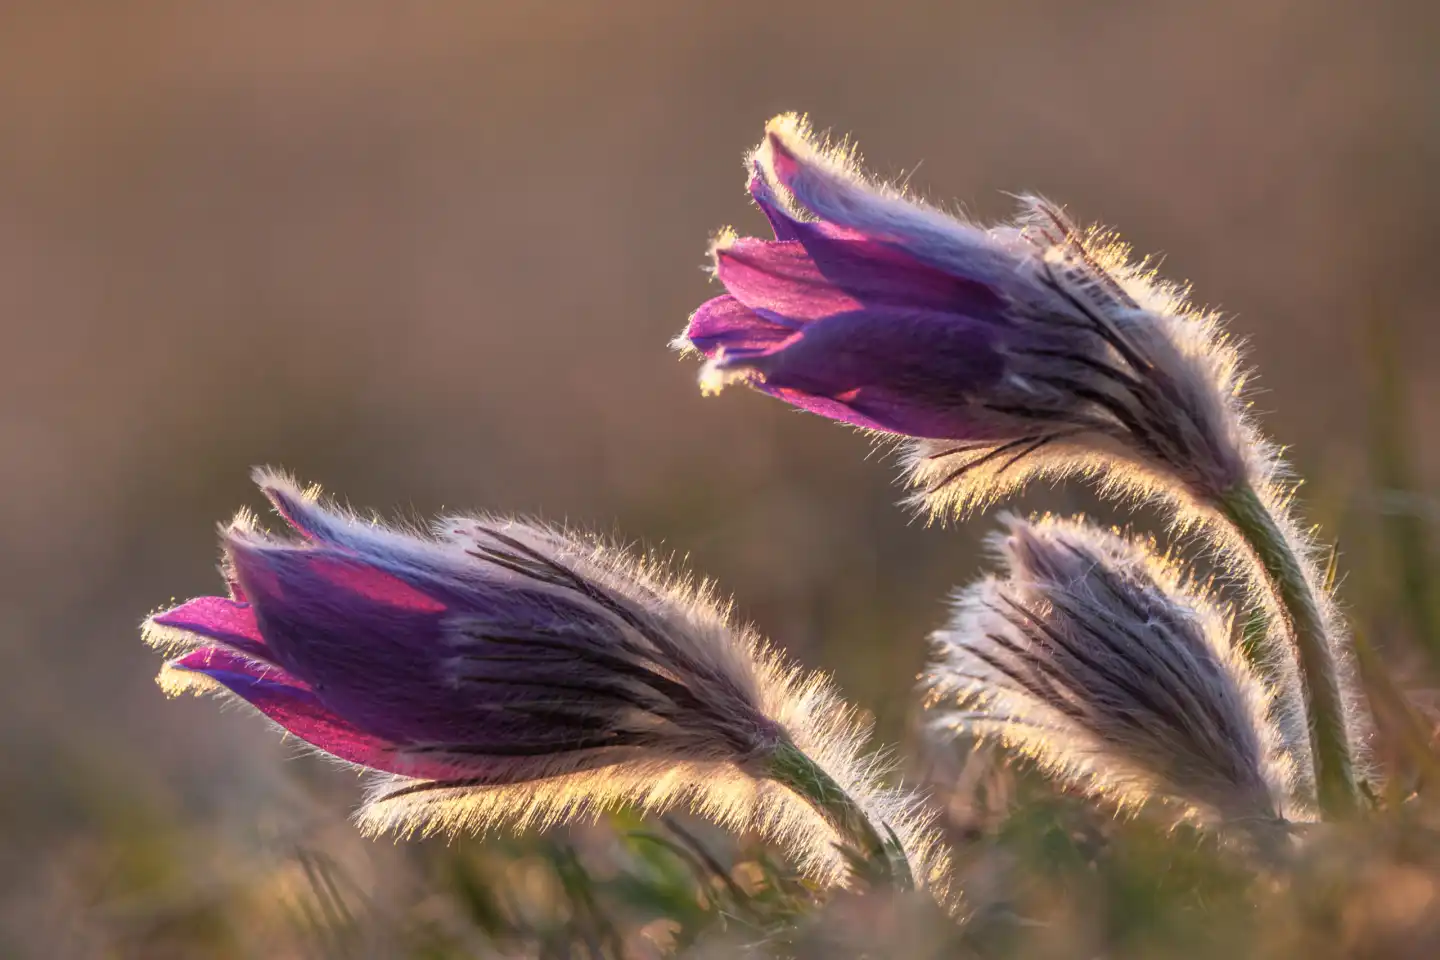 Pasque flower in the backlight